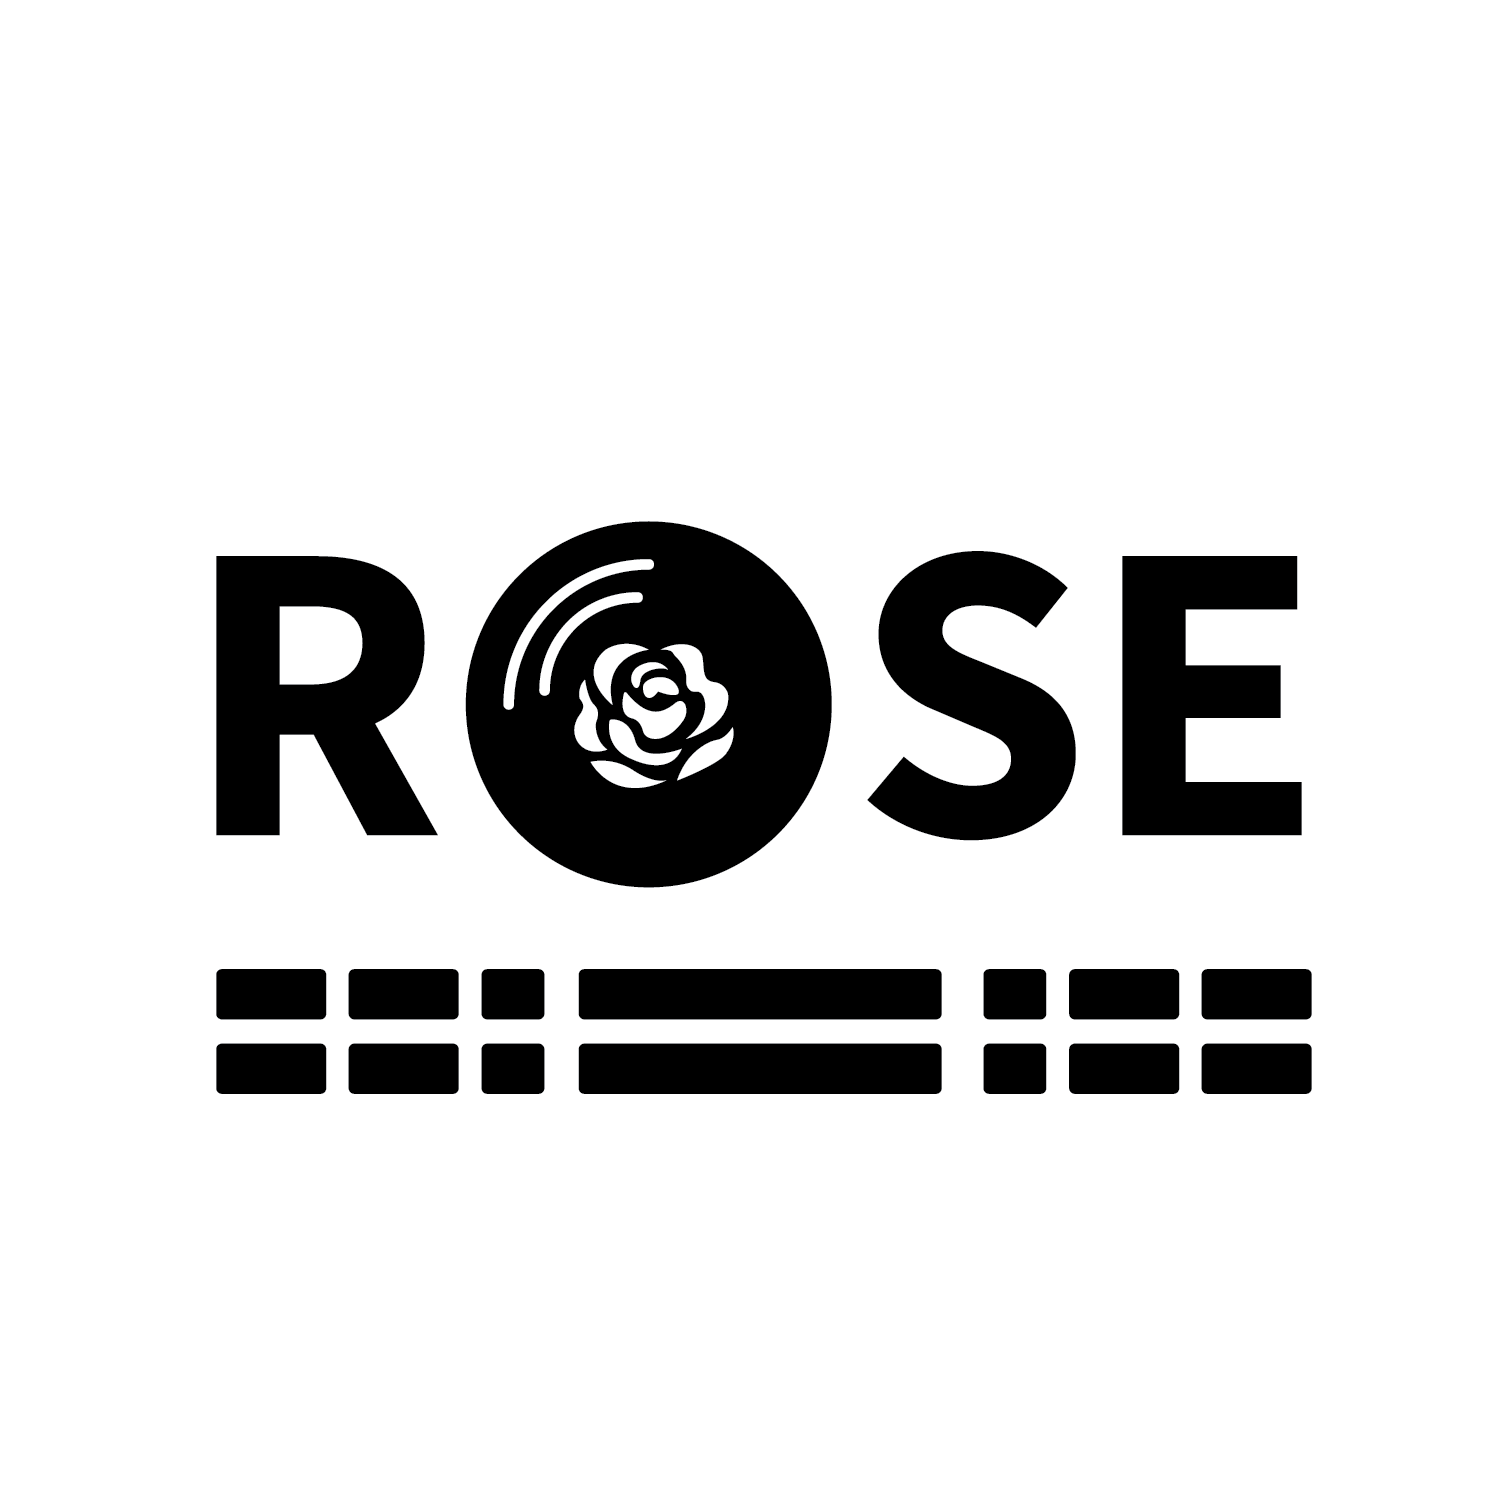 Electric Rose Events